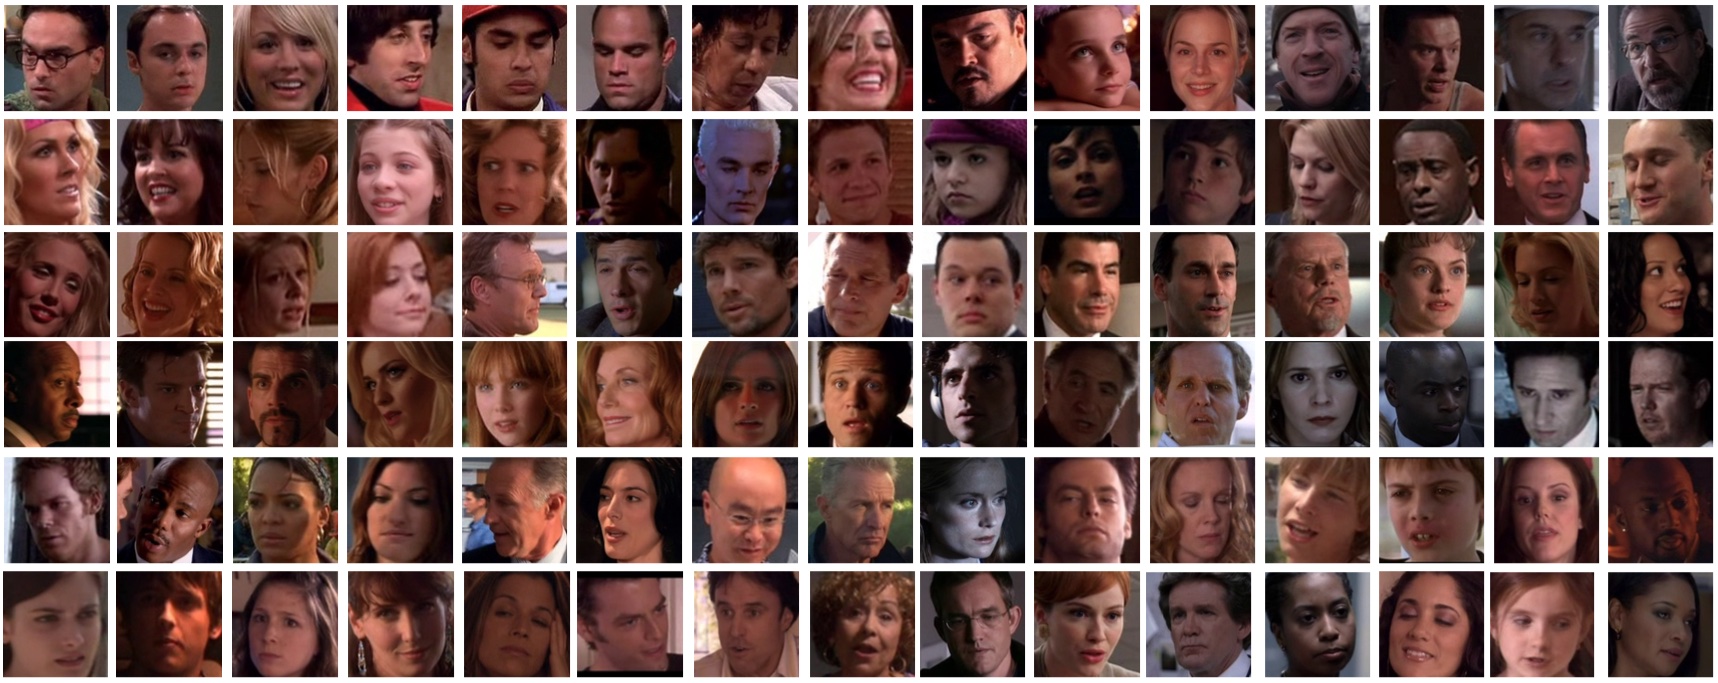 Examples of faces in TSFT dataset